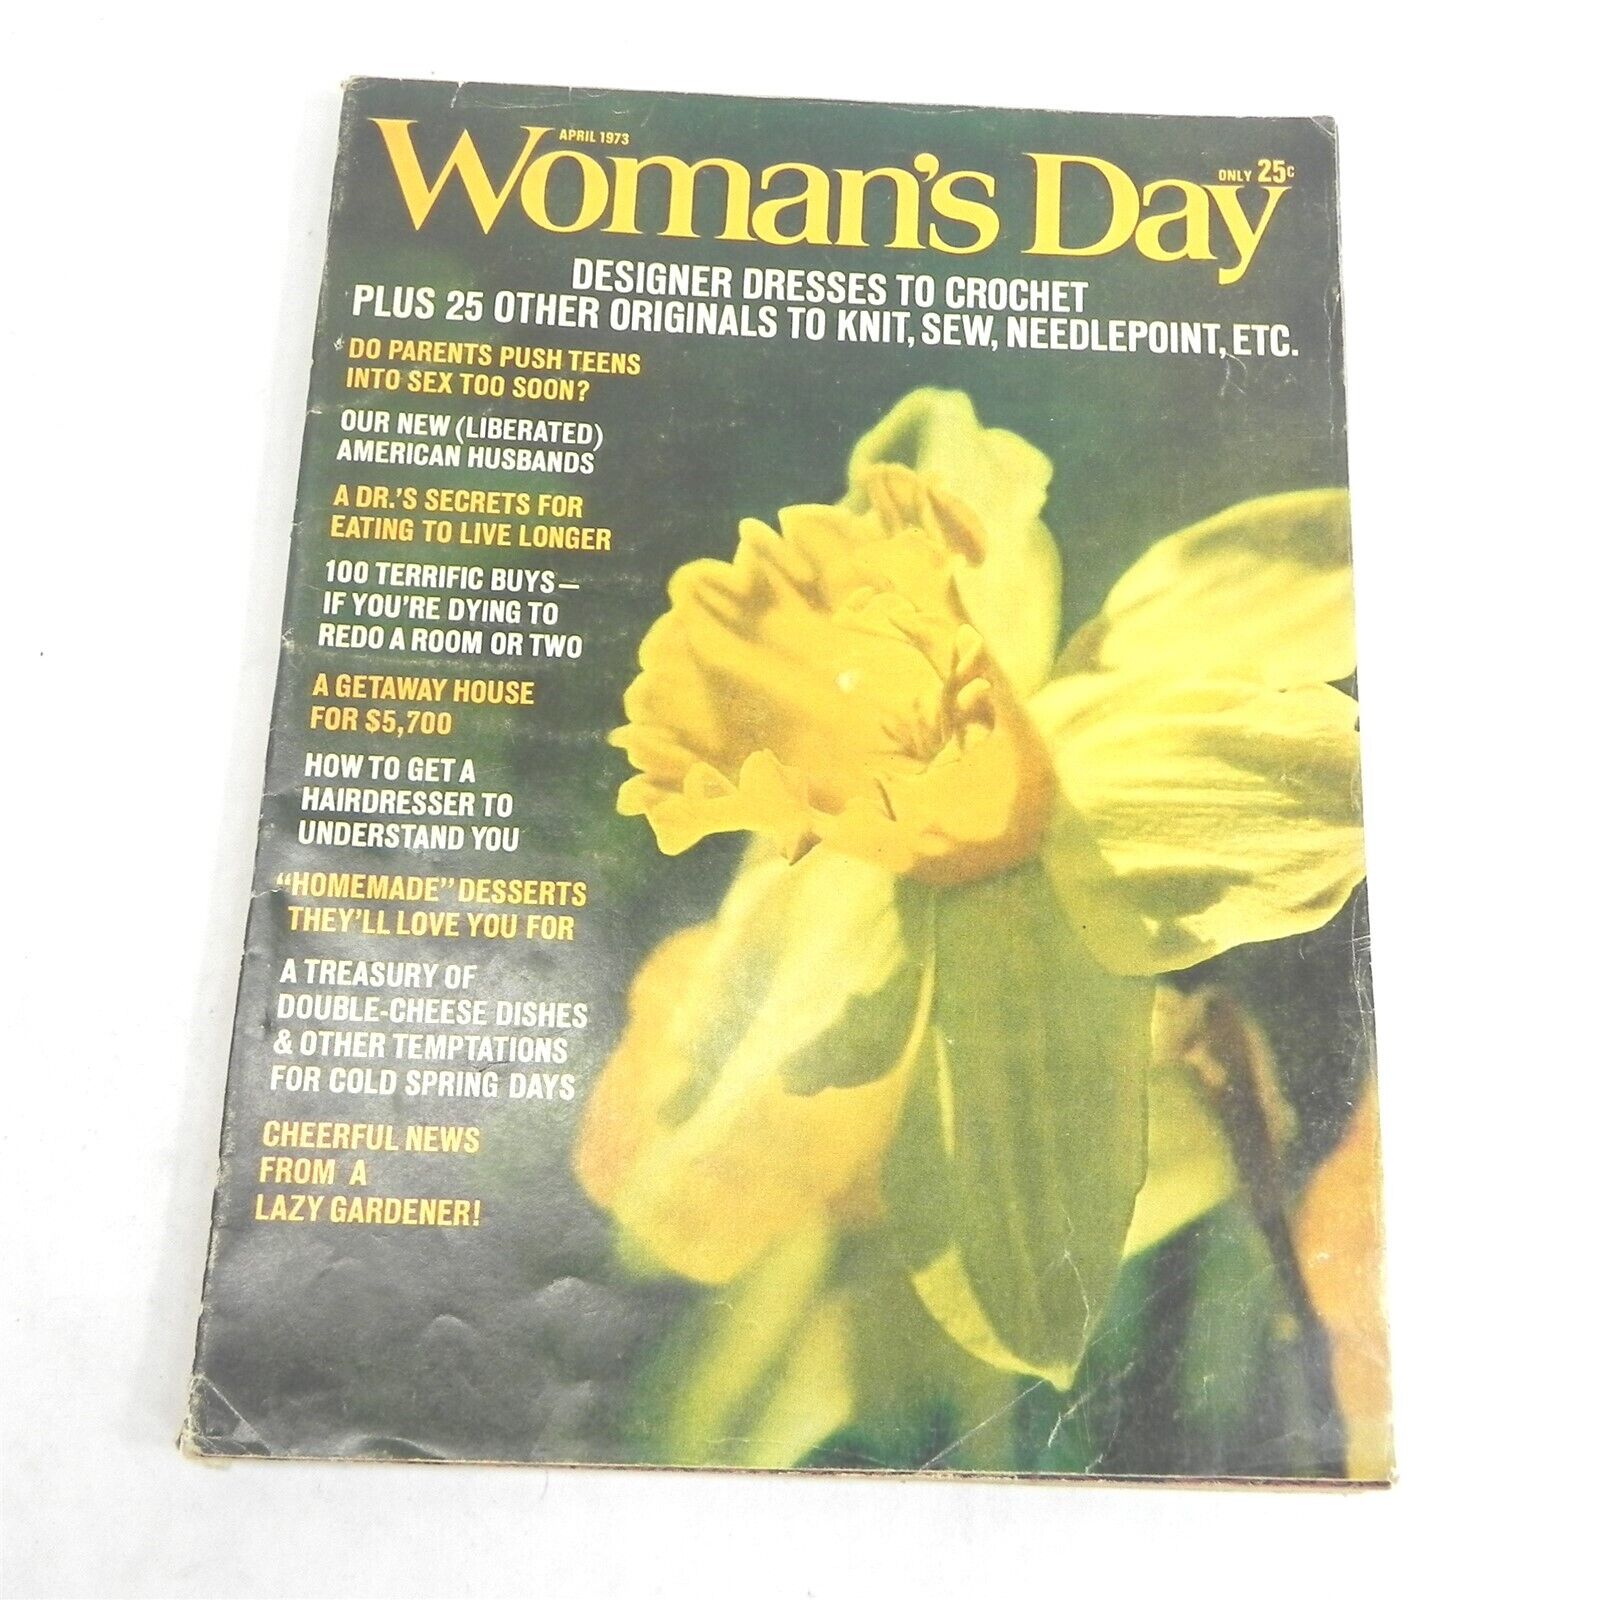 VINTAGE APRIL 1973 WOMANS DAY MAGAZINE SINGLE ISSUE LIFESTYLE HEALTH 